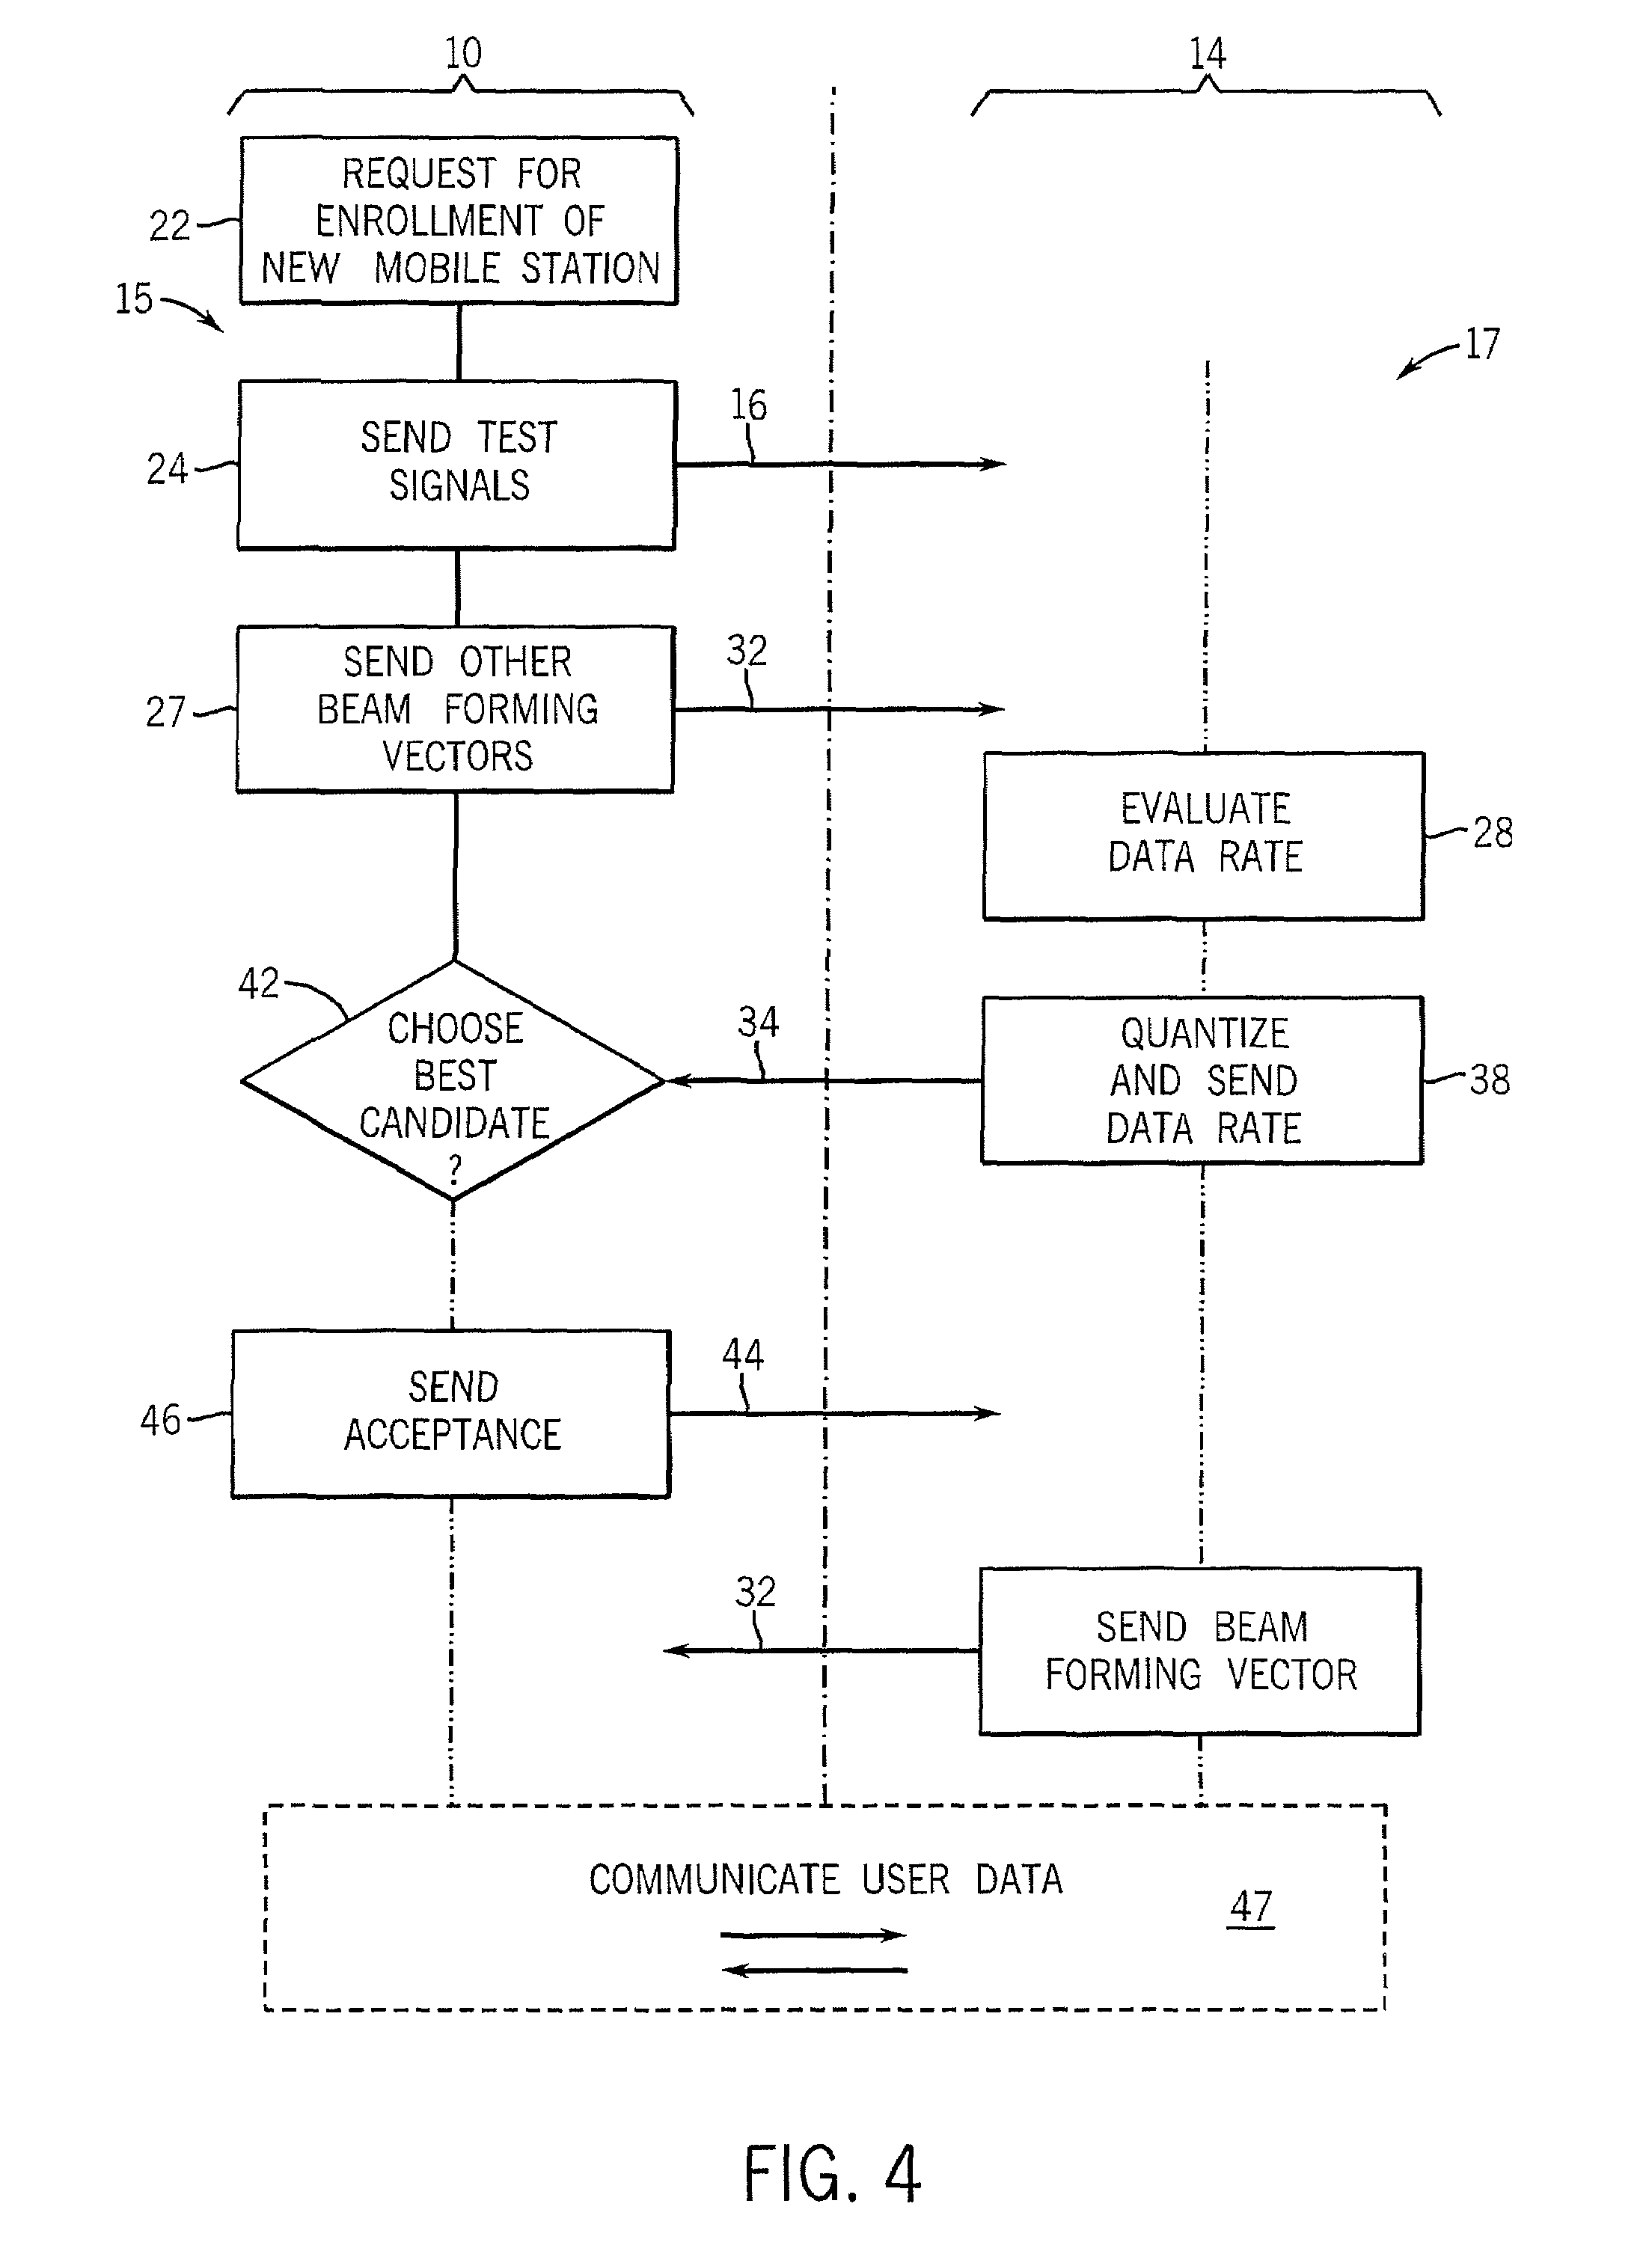 Distributed scheduling method for multi-antenna wireless system